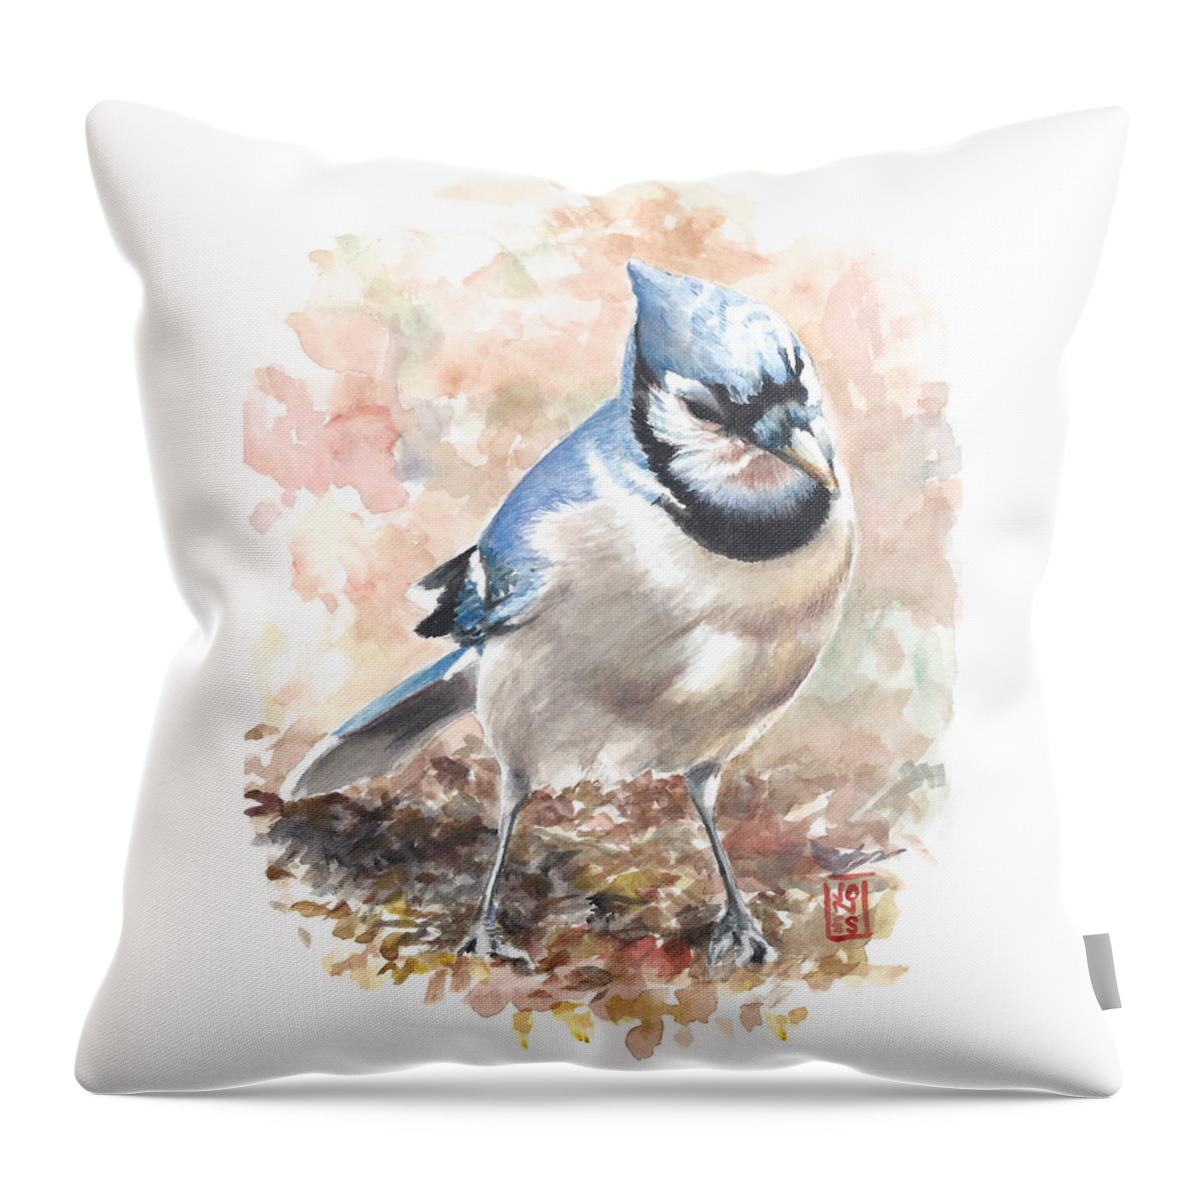 Jay Throw Pillow featuring the painting Blue Jay by Debra Jones